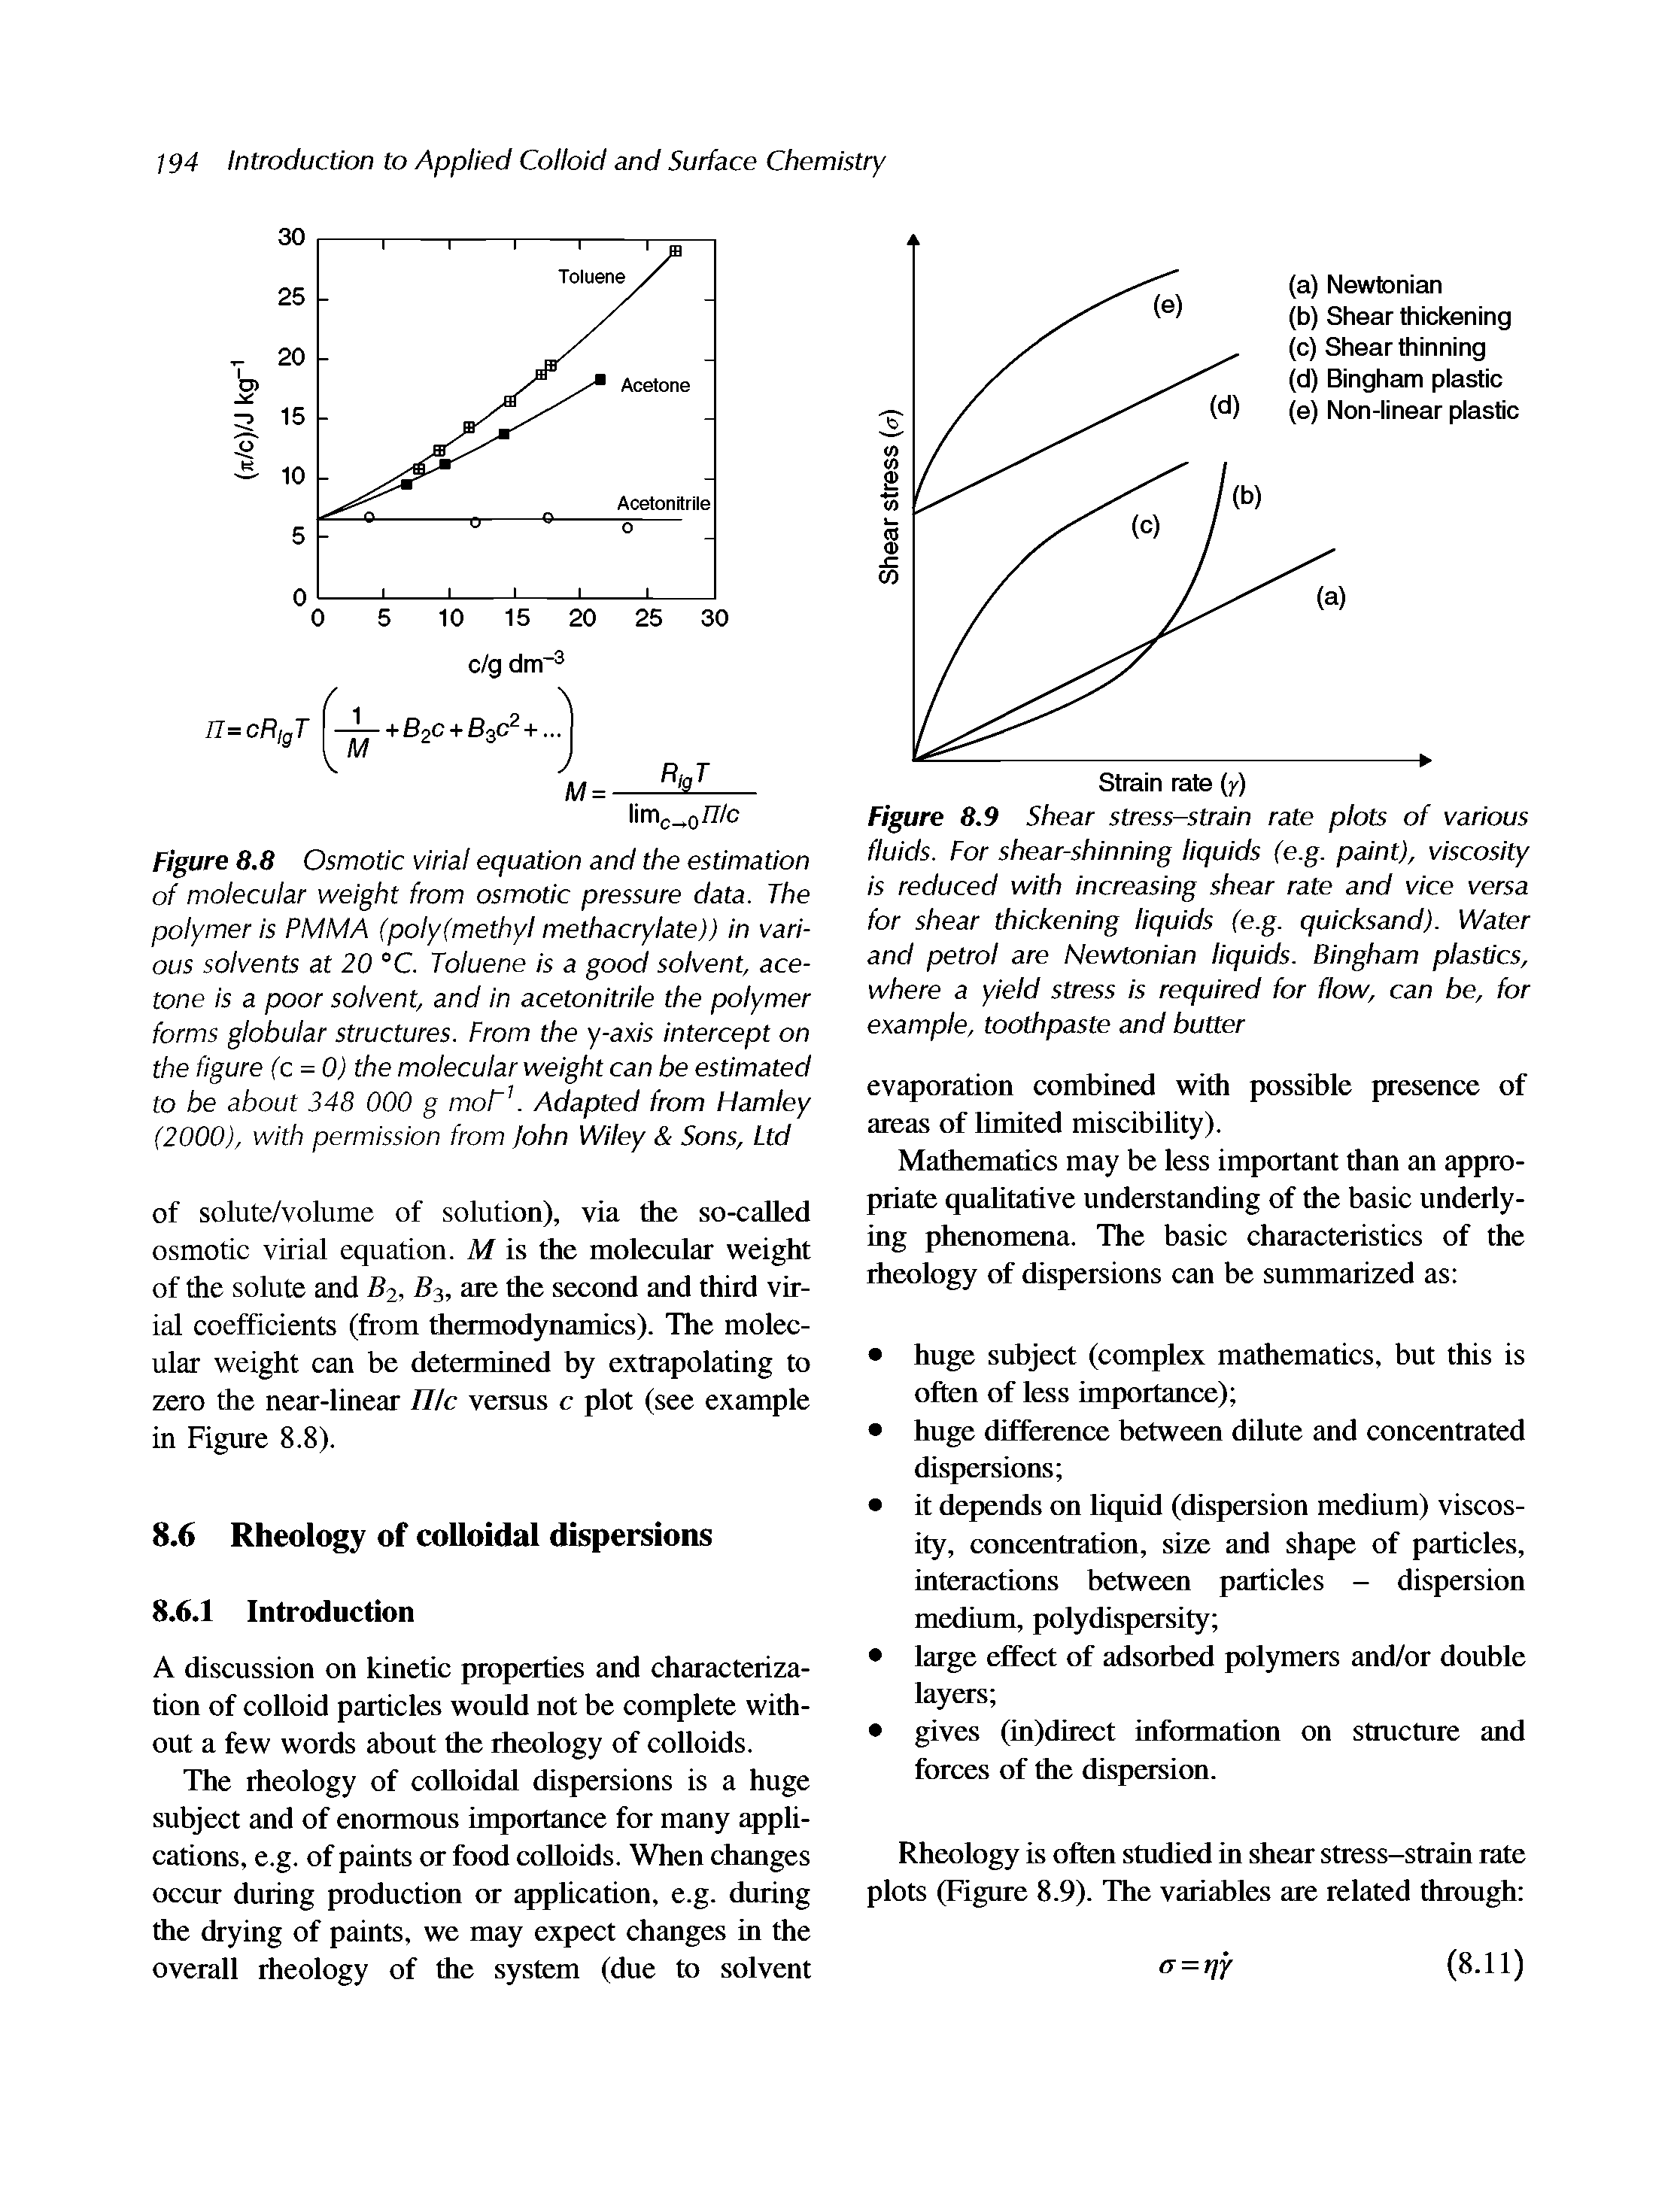 Figure 8.8 Osmotic virial equation and the estimation of molecular weight from osmotic pressure data. The polymer is PMMA (poly(methyl methacrylate)) in various solvents at 20 °C. Toluene is a good solvent, acetone is a poor solvent, and in acetonitrile the polymer forms globular structures. From the y-axis intercept on the figure (c = 0) the molecular weight can be estimated to be about 348 000 g mot . Adapted from Hamley (2000), with permission from John Wiley Sons, Ltd...